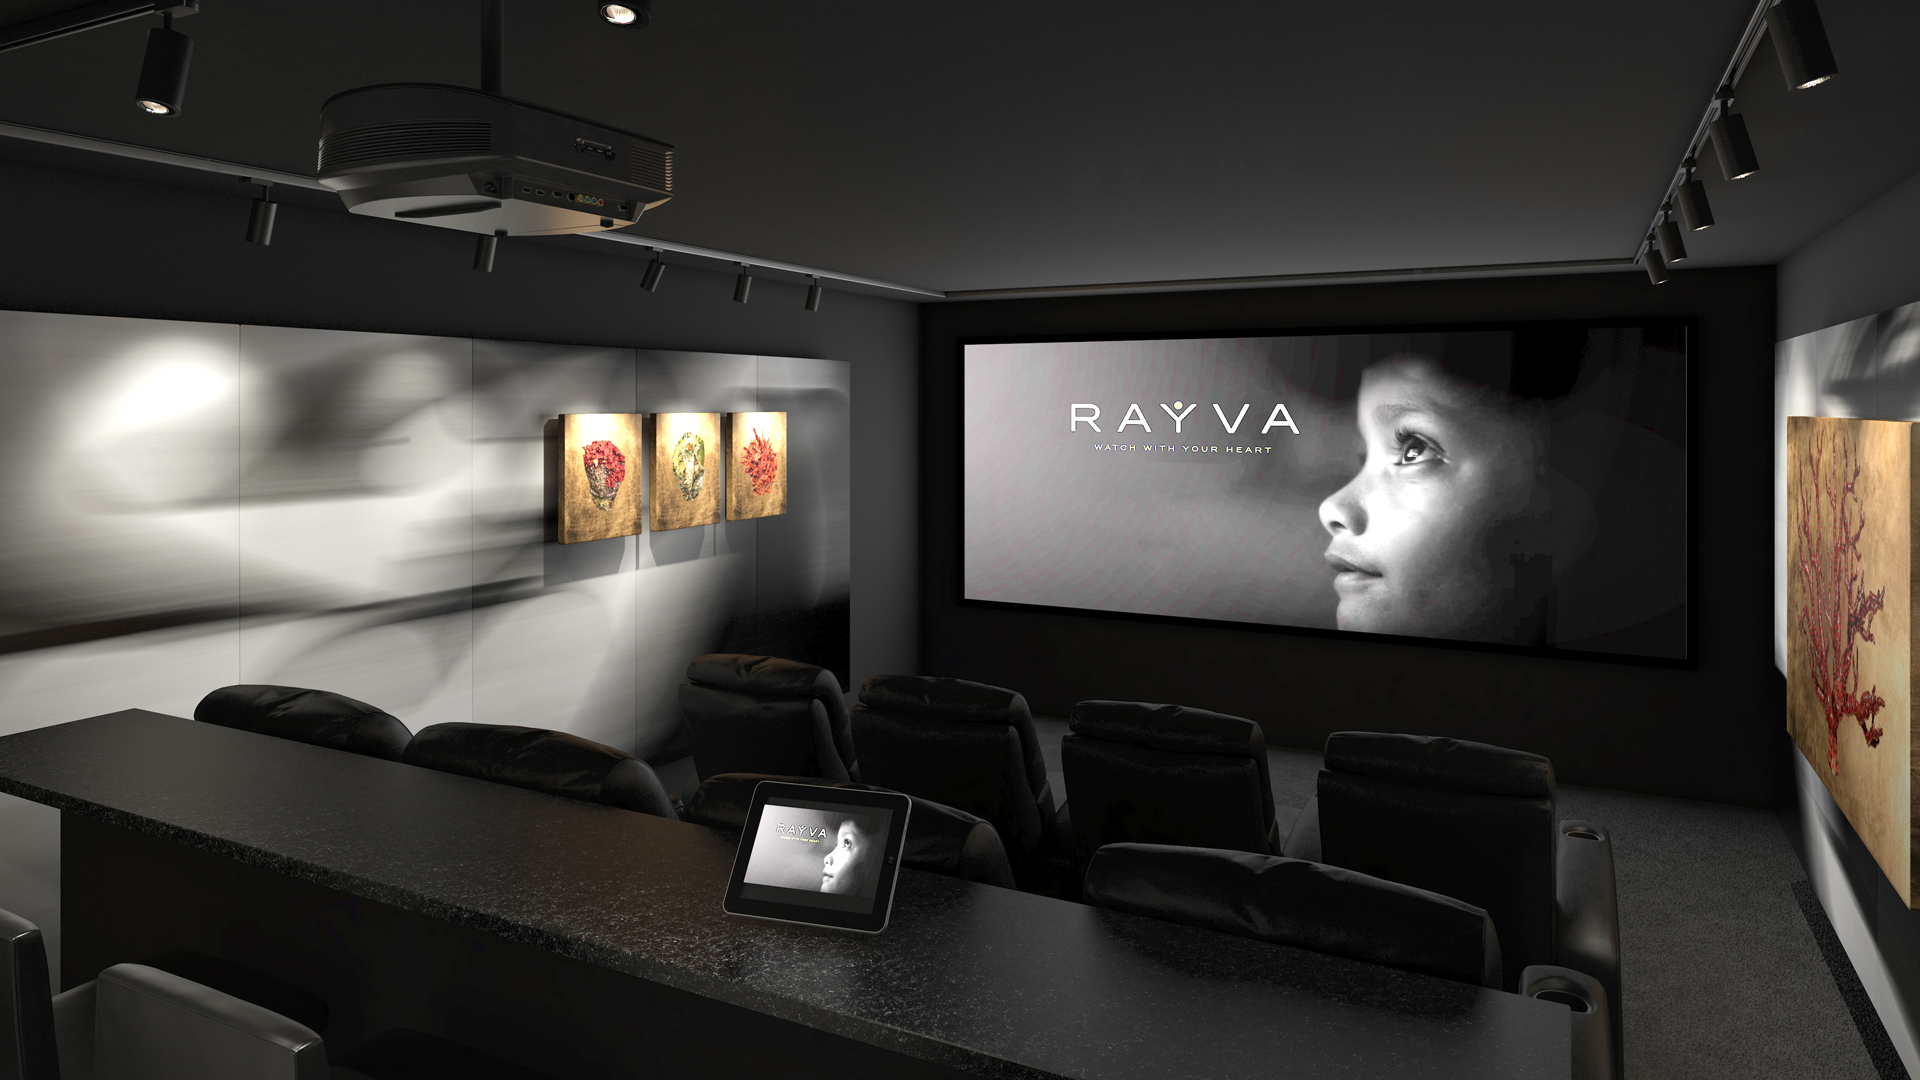 Complete Home Theater Packages